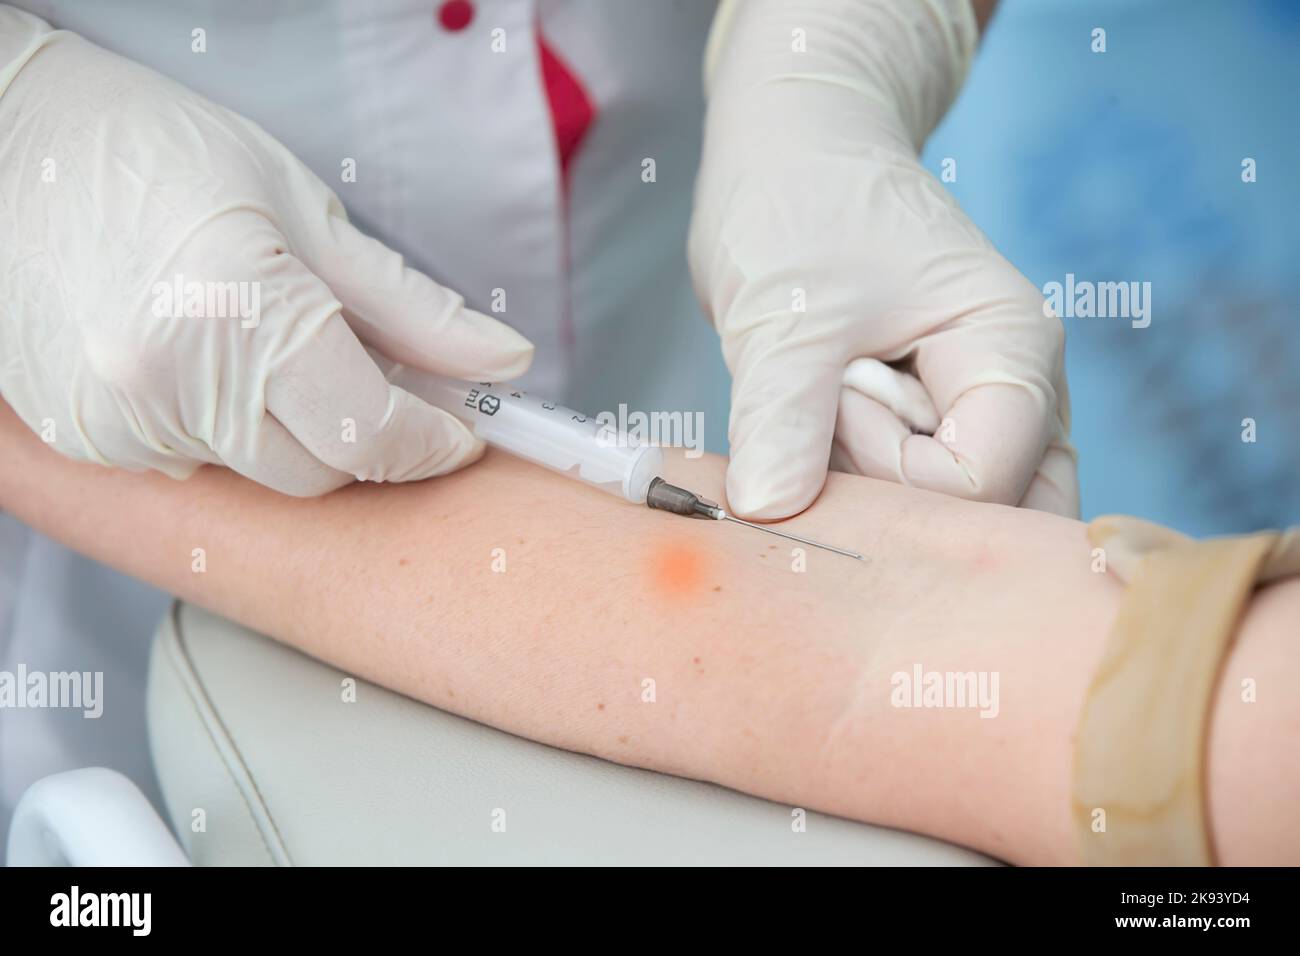 Close-up hand of a nurse, doctor or medical technologist in medical gloves takes a blood sample from a patient in a hospital. Stock Photo